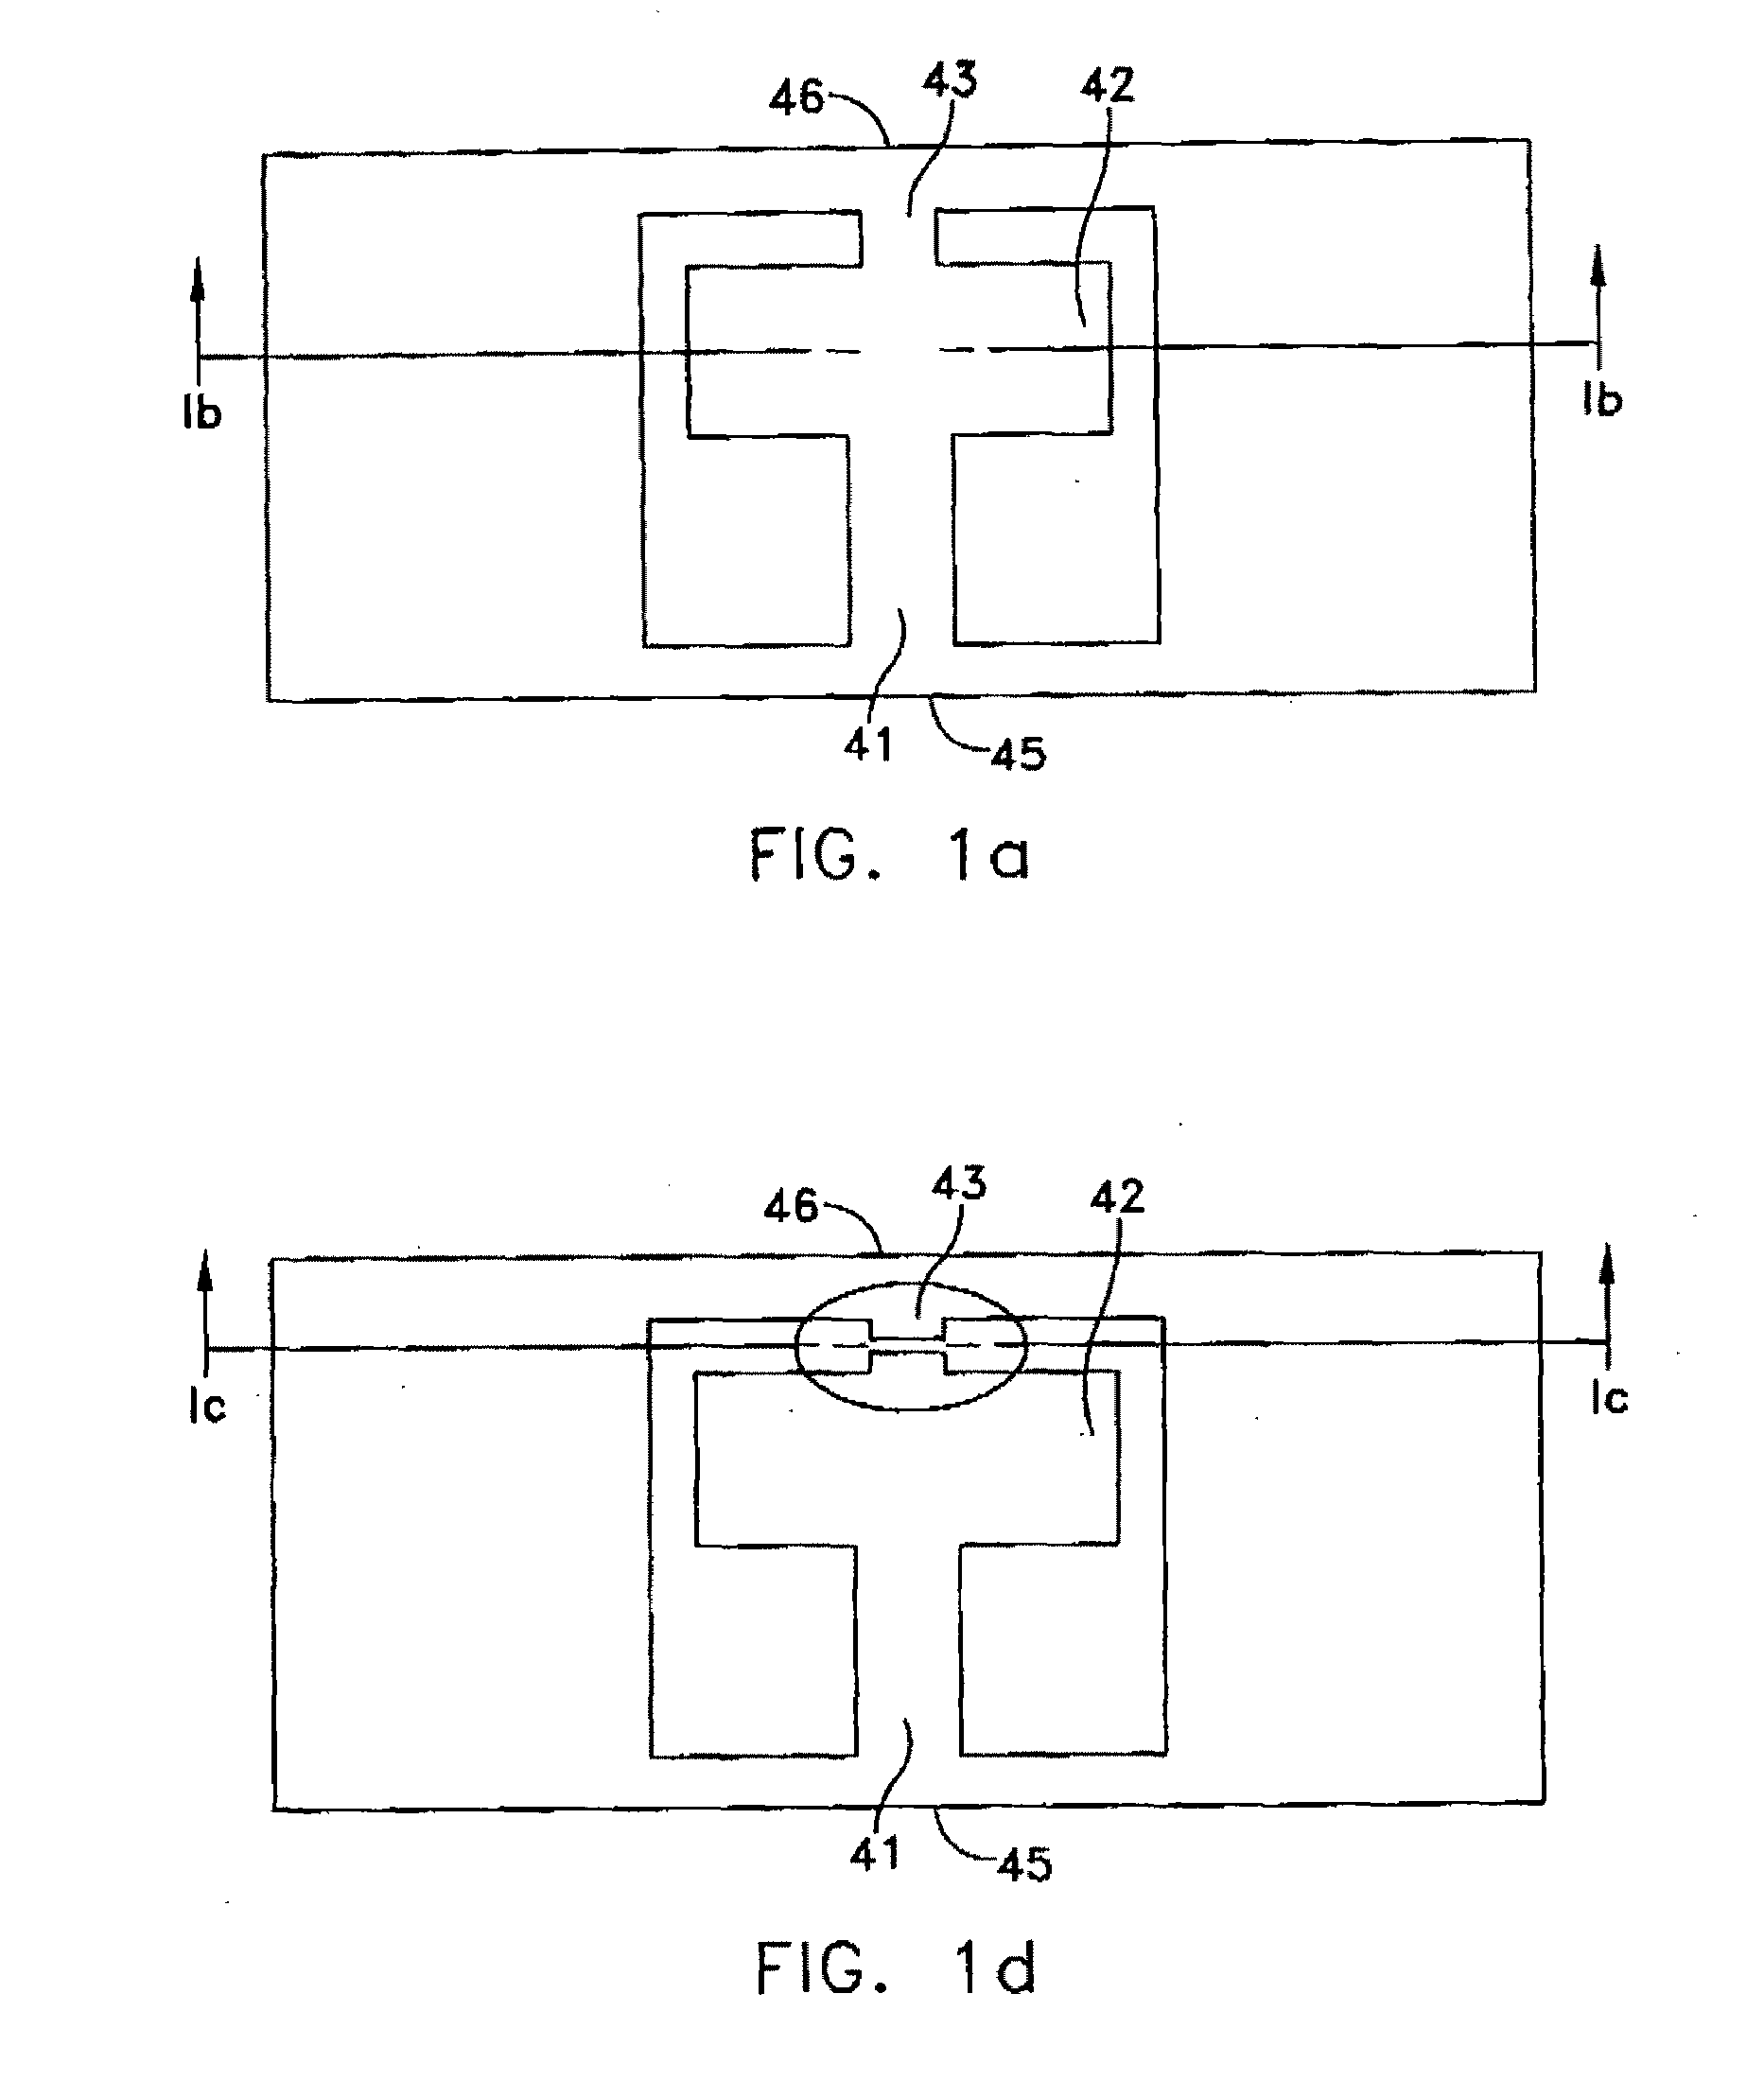 Polyimide substrate bonded to other substrate